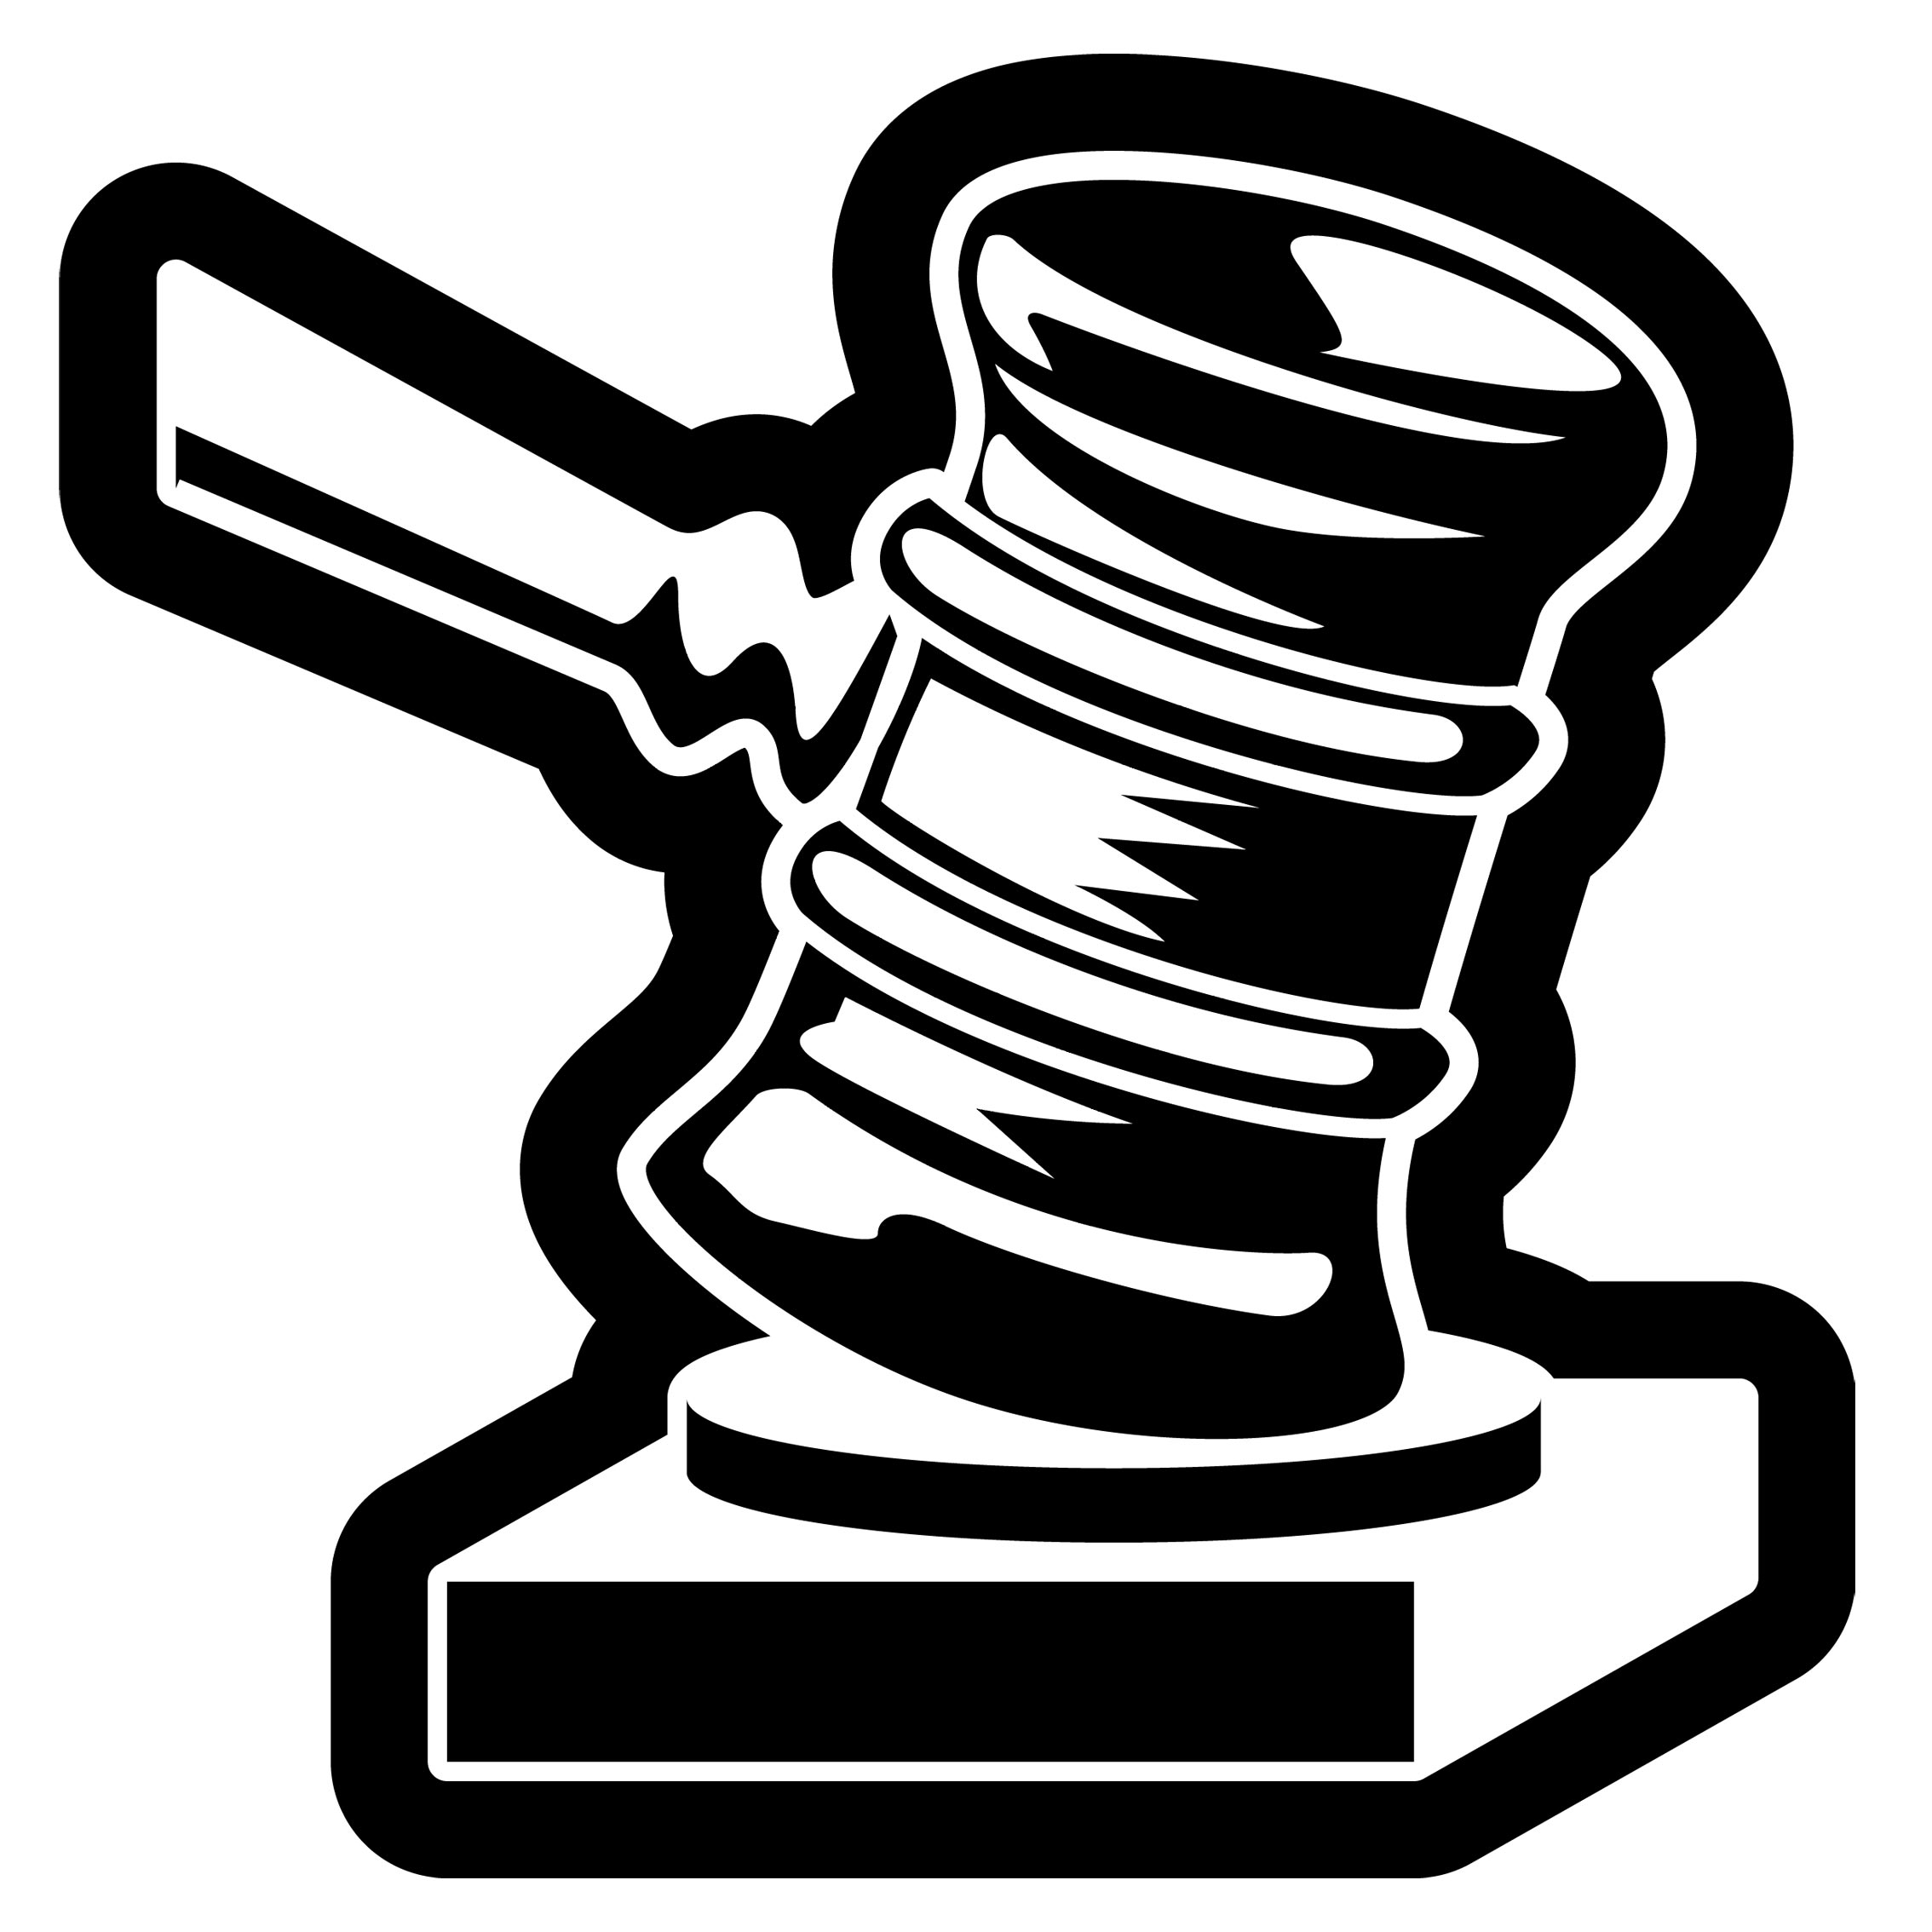 Clipart Justice Hammer   Royalty Free Vector Design